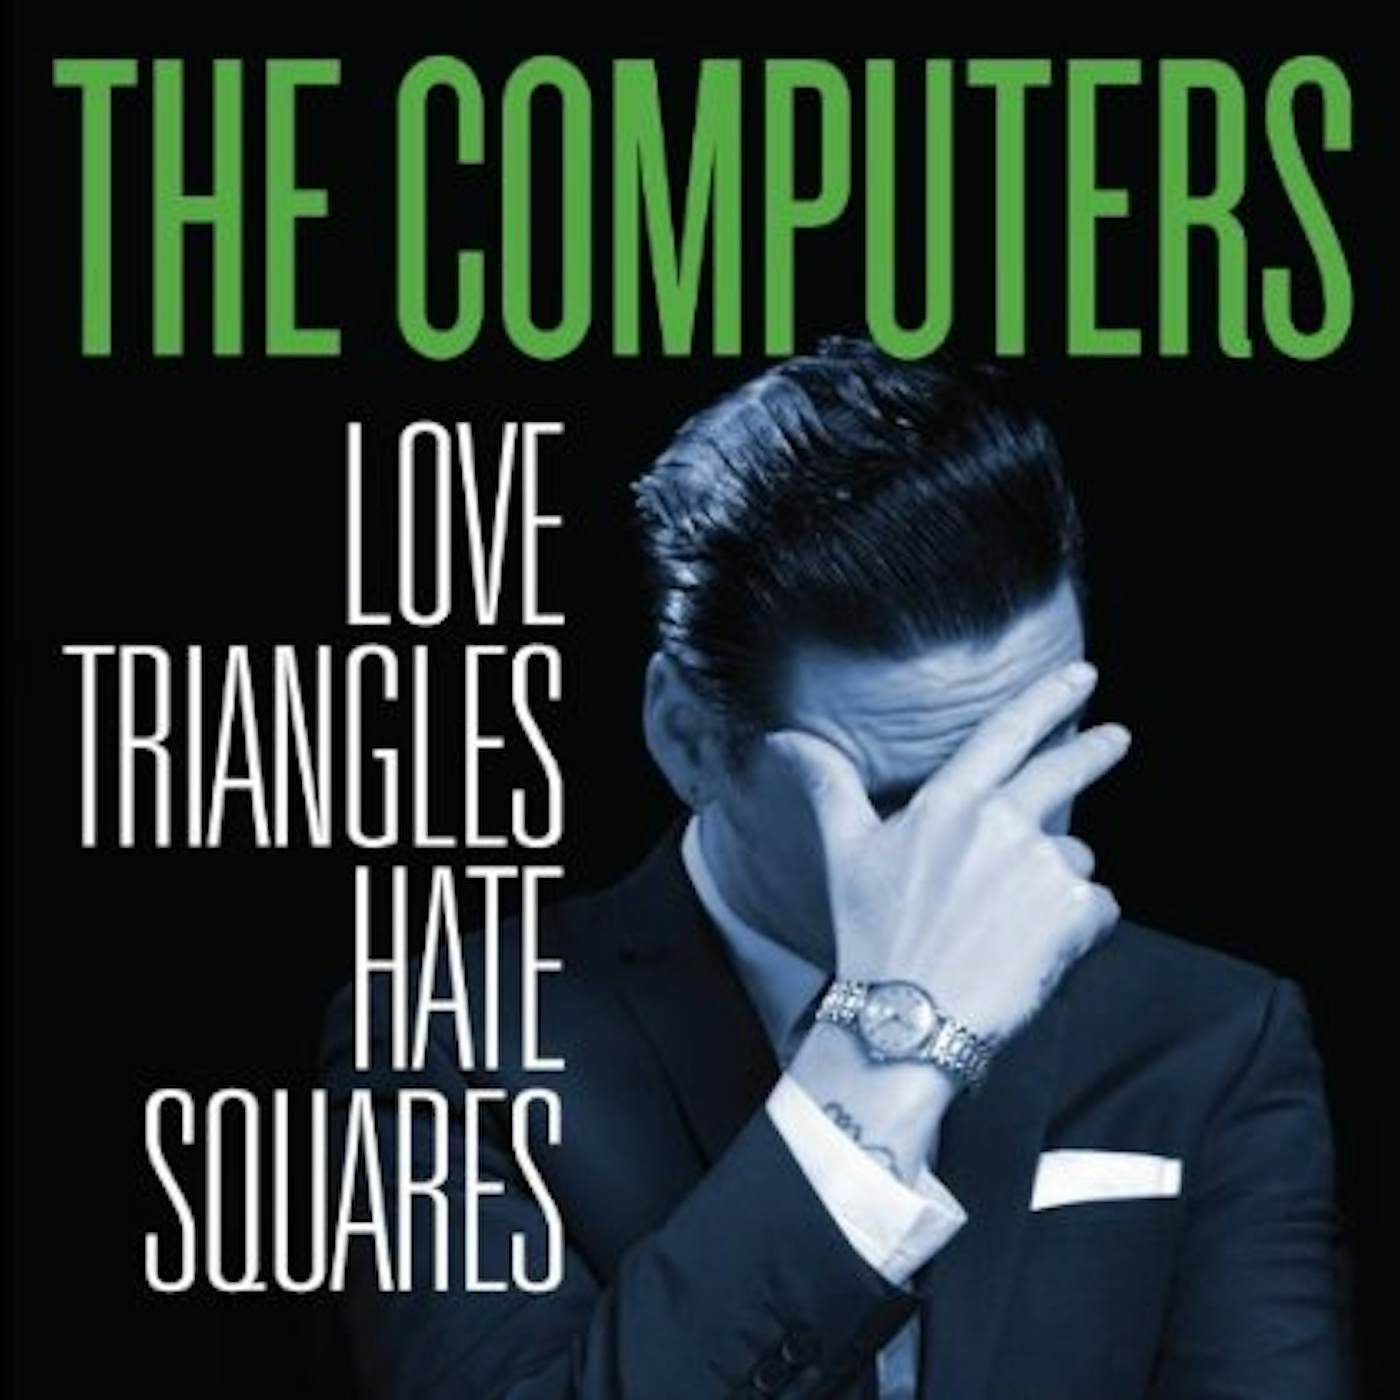 Computers LOVE TRIANGLES HATE SQUARES CD